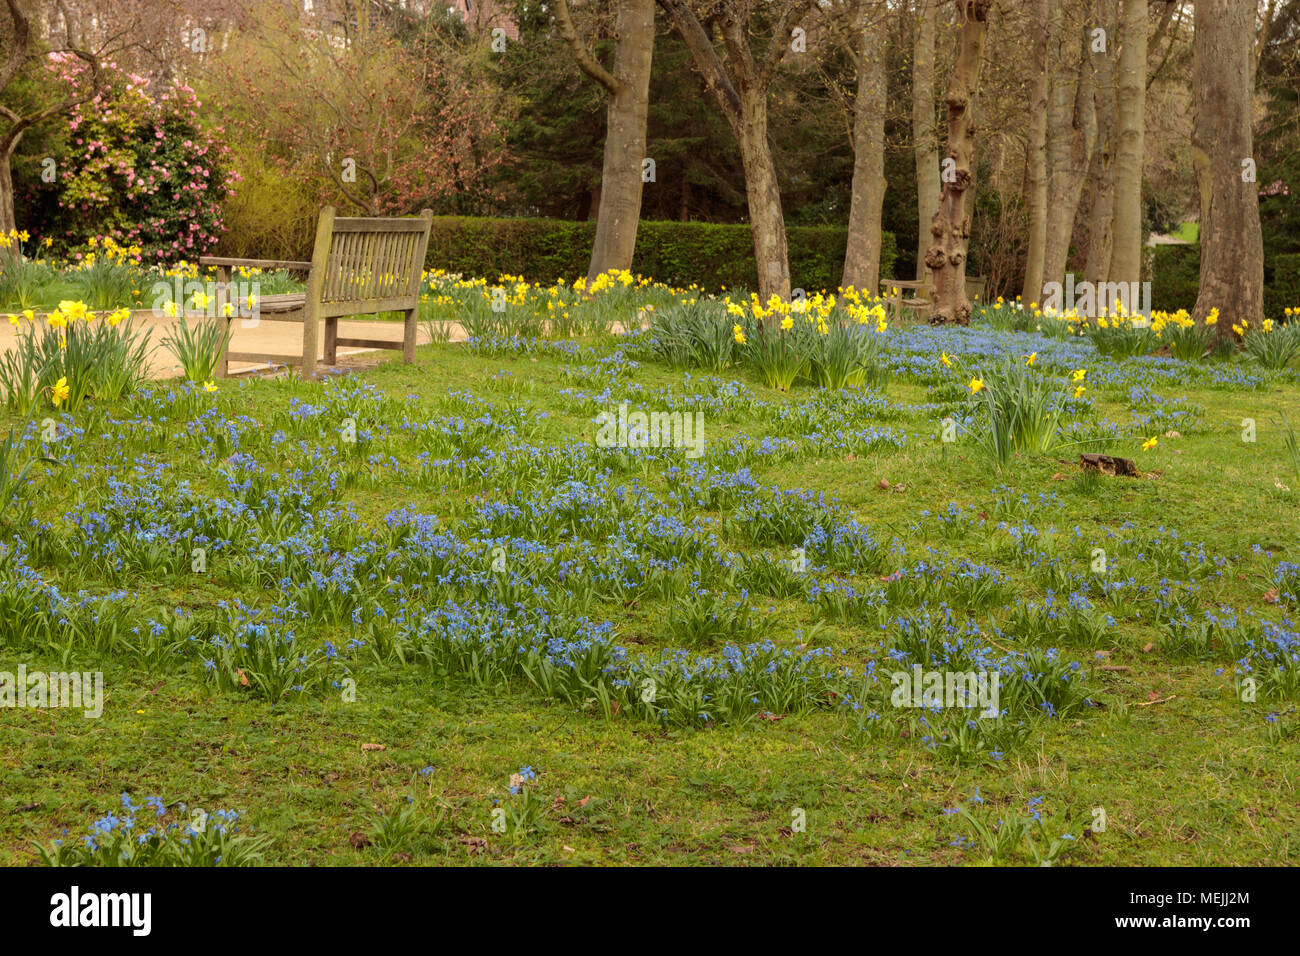 Daffodils growing in a park Stock Photo